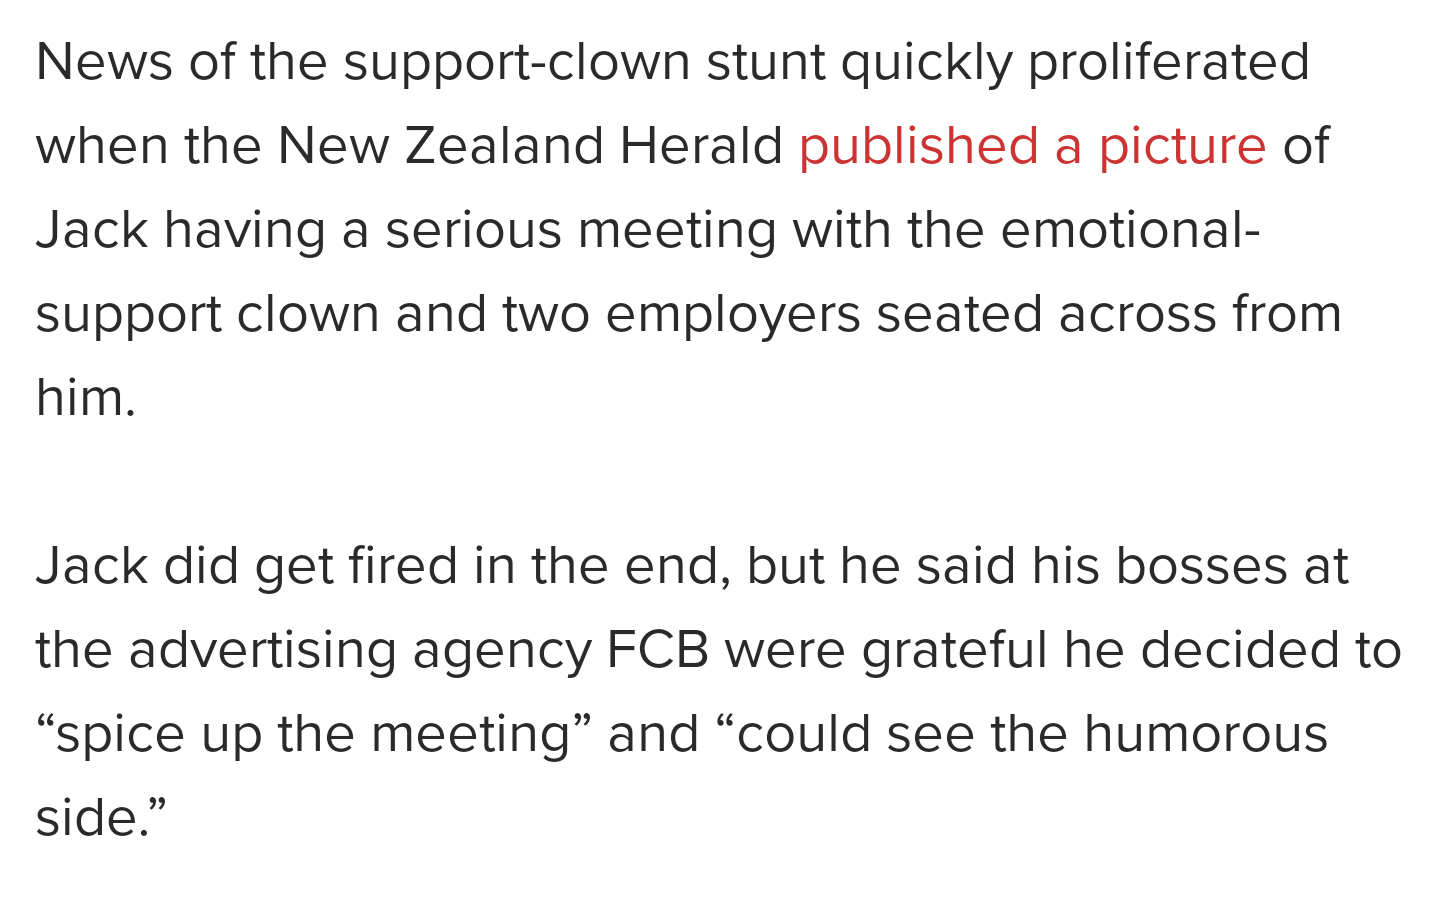 Platelet - News of the supportclown stunt quickly proliferated when the New Zealand Herald published a picture of Jack having a serious meeting with the emotional support clown and two employers seated across from him. Jack did get fired in the end, but h